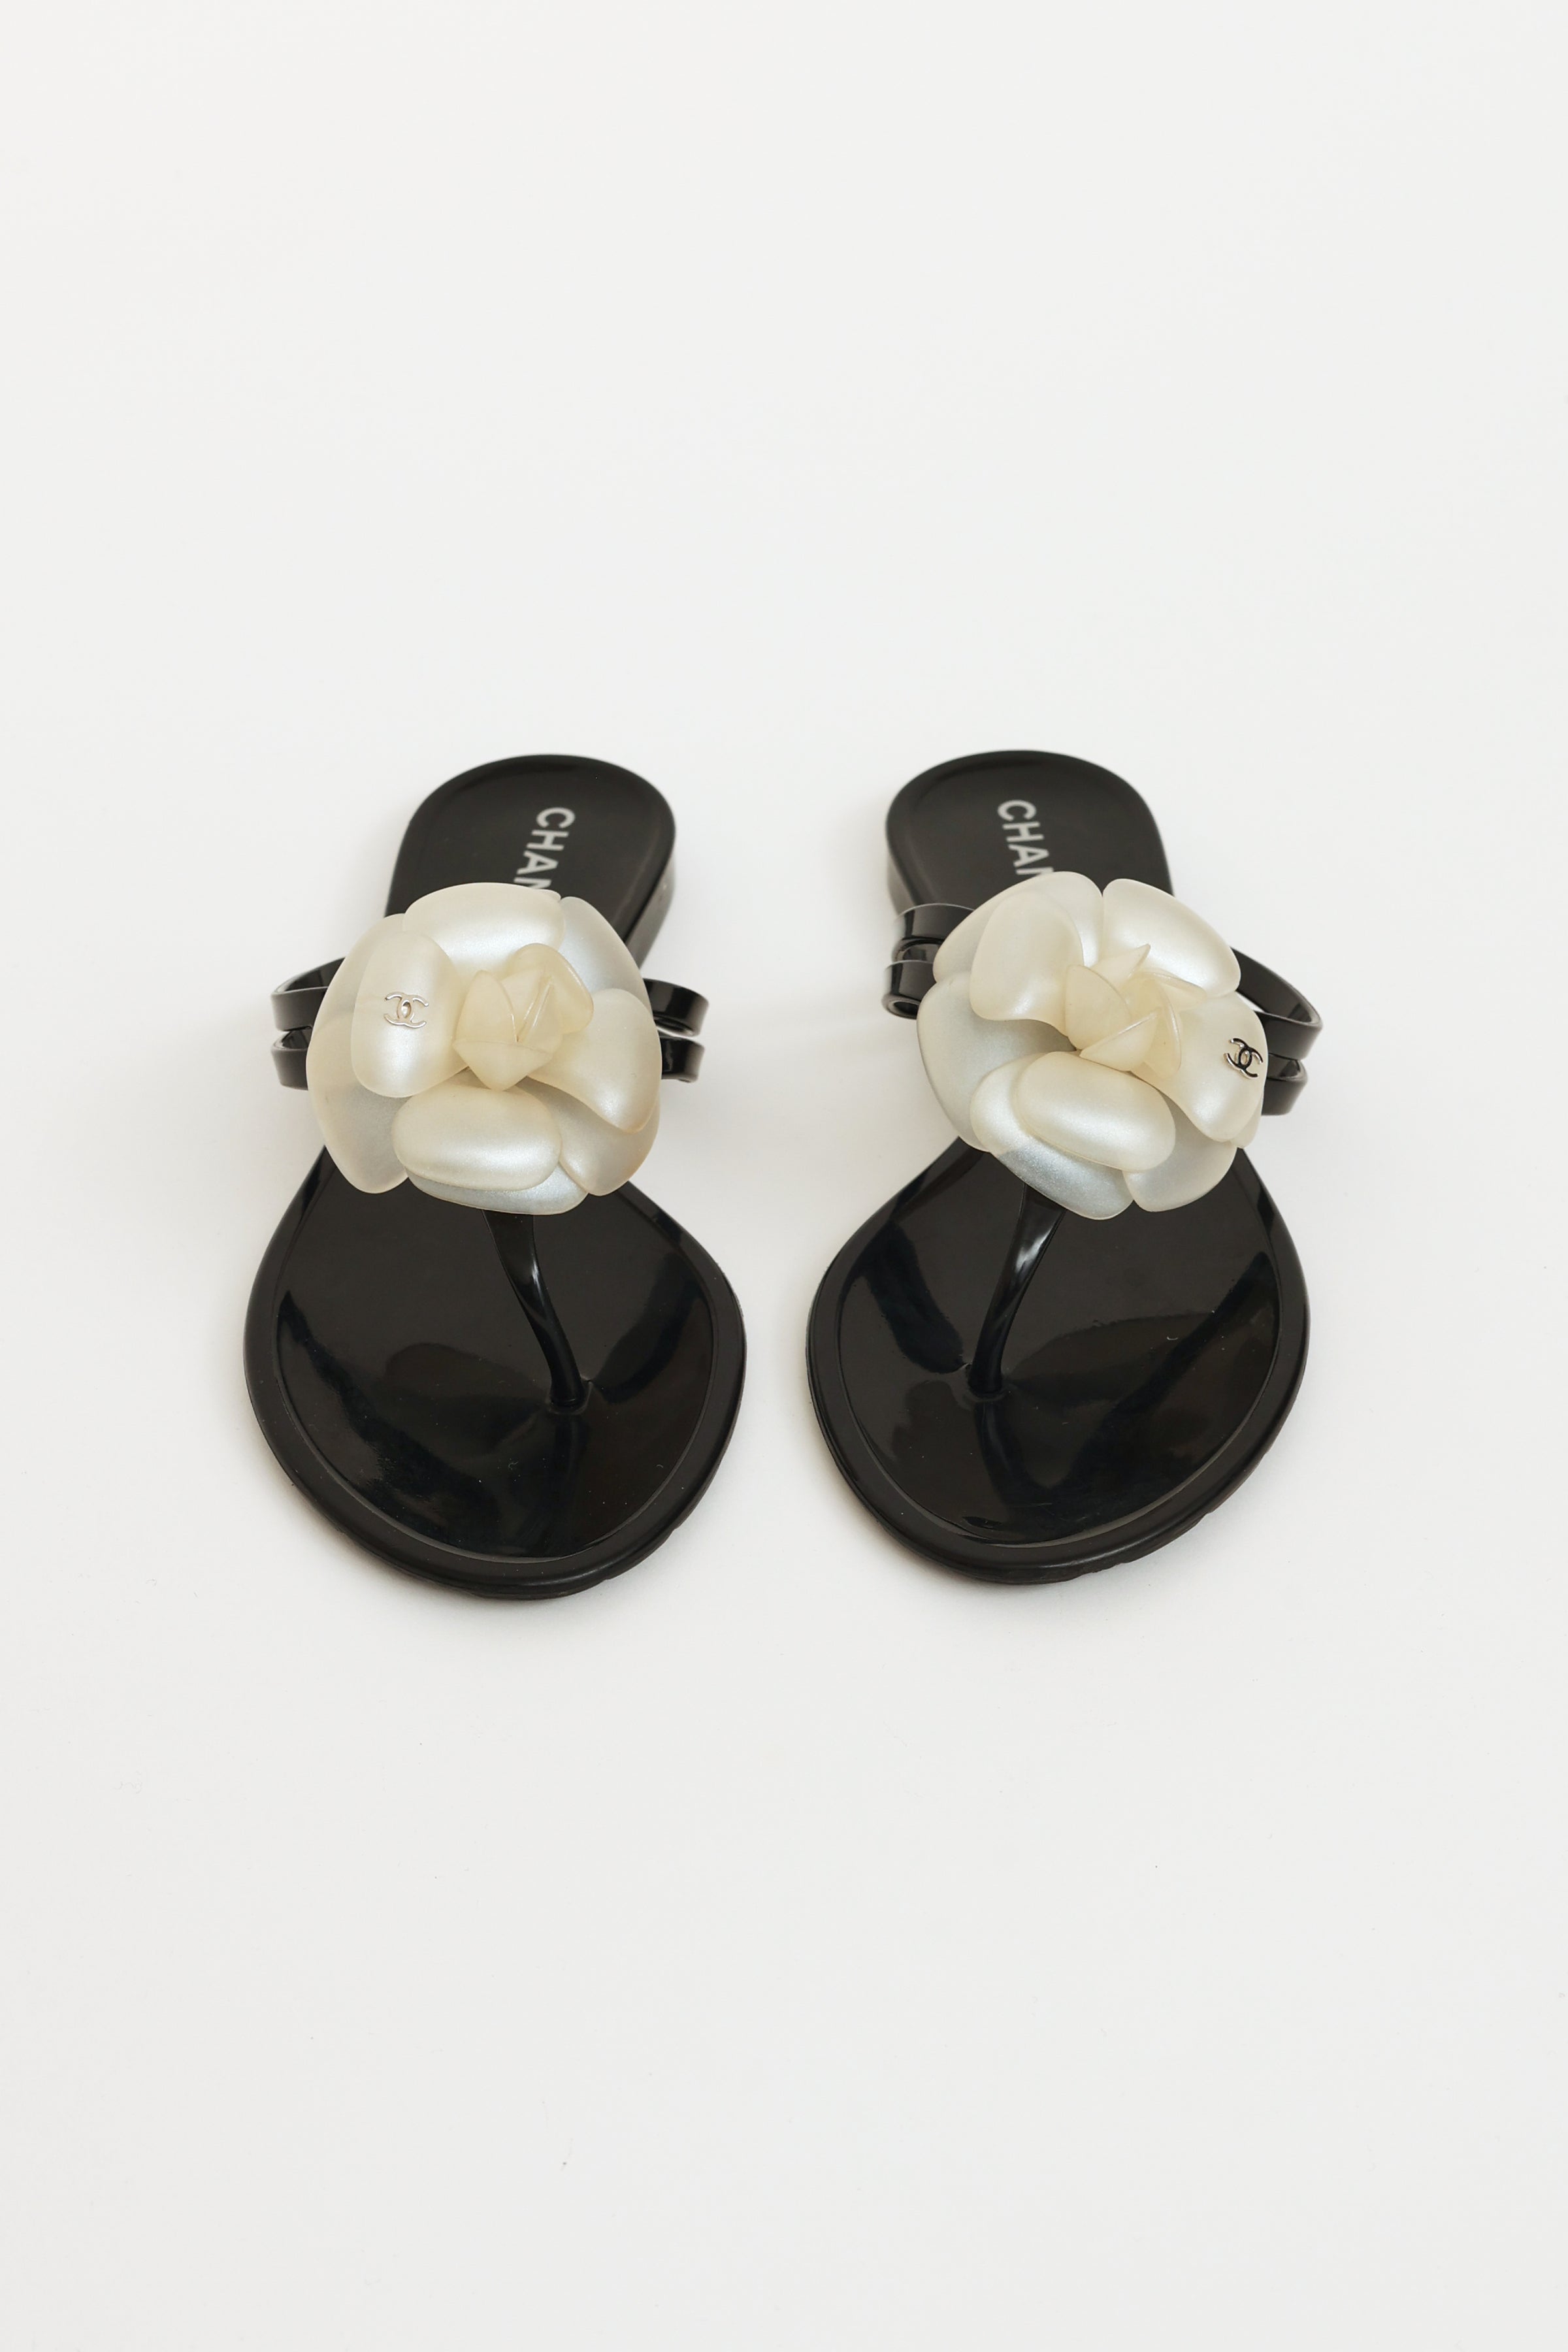 Auth CHANEL CC Camellia Thong Jelly Rubber Sandals 36 Black/Ivory New fm  Japan